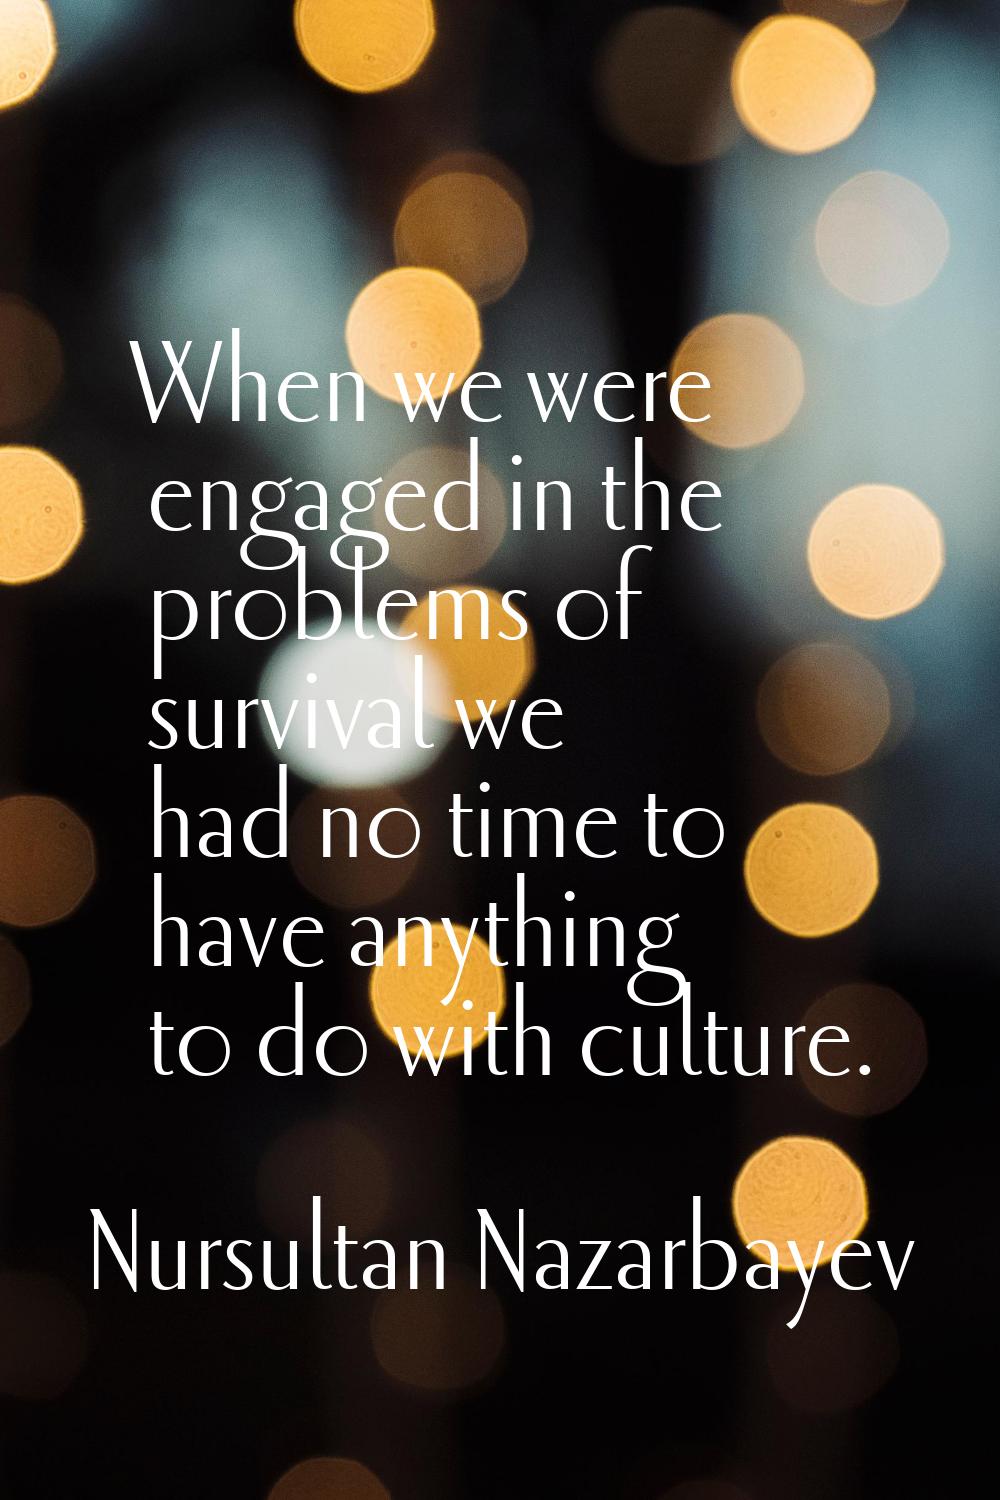 When we were engaged in the problems of survival we had no time to have anything to do with culture